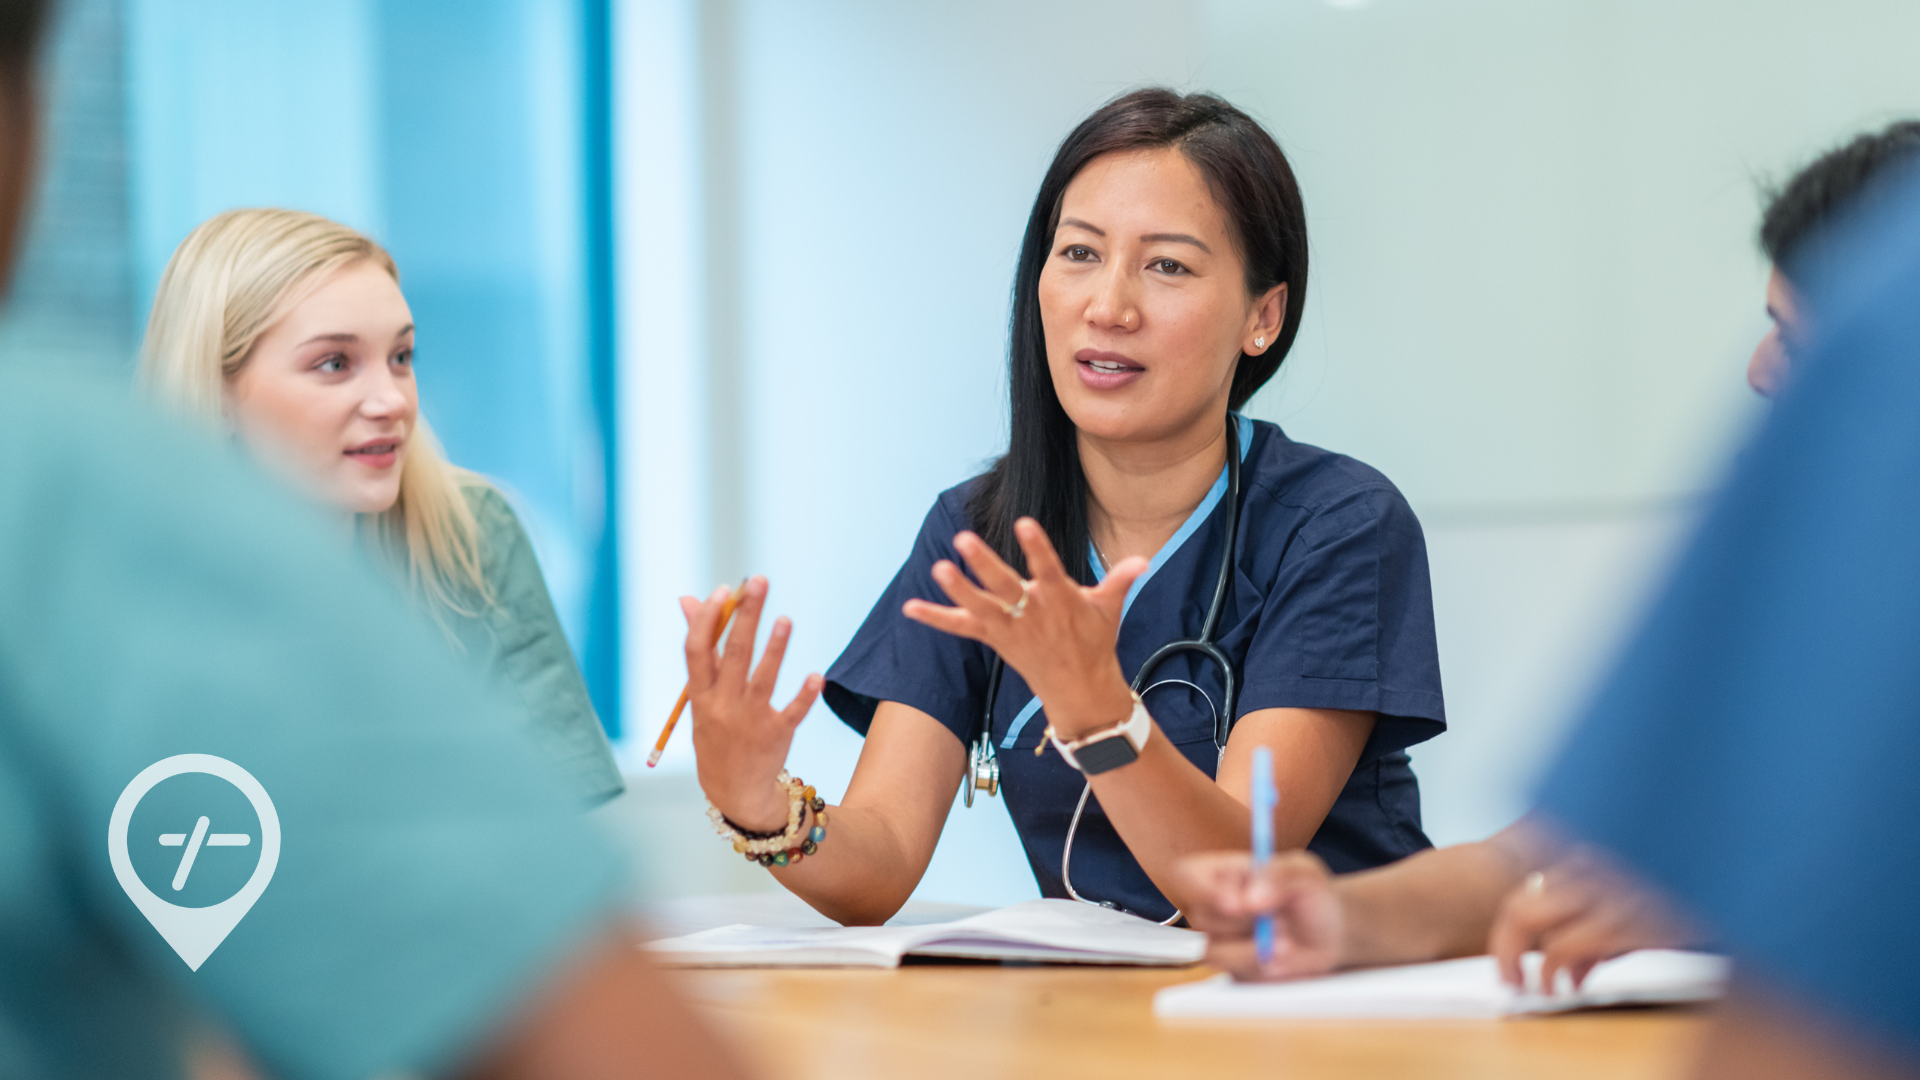 A female nurse is advocating for herself during a healthcare team meeting.